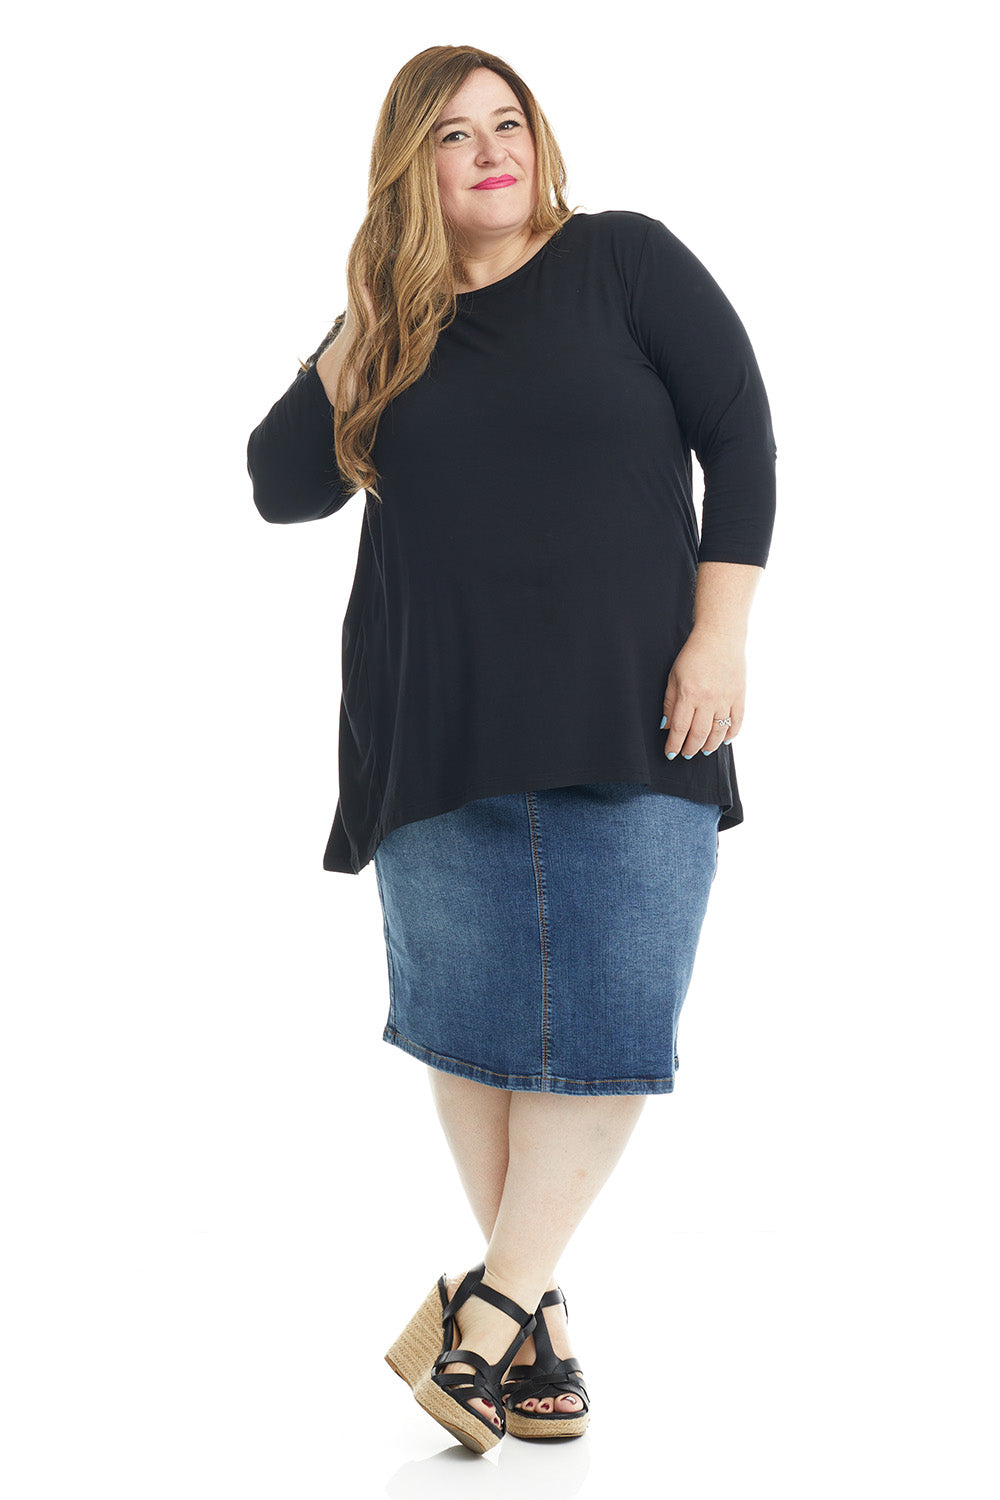 black high-low loose tunic plus size top for women good for maternity